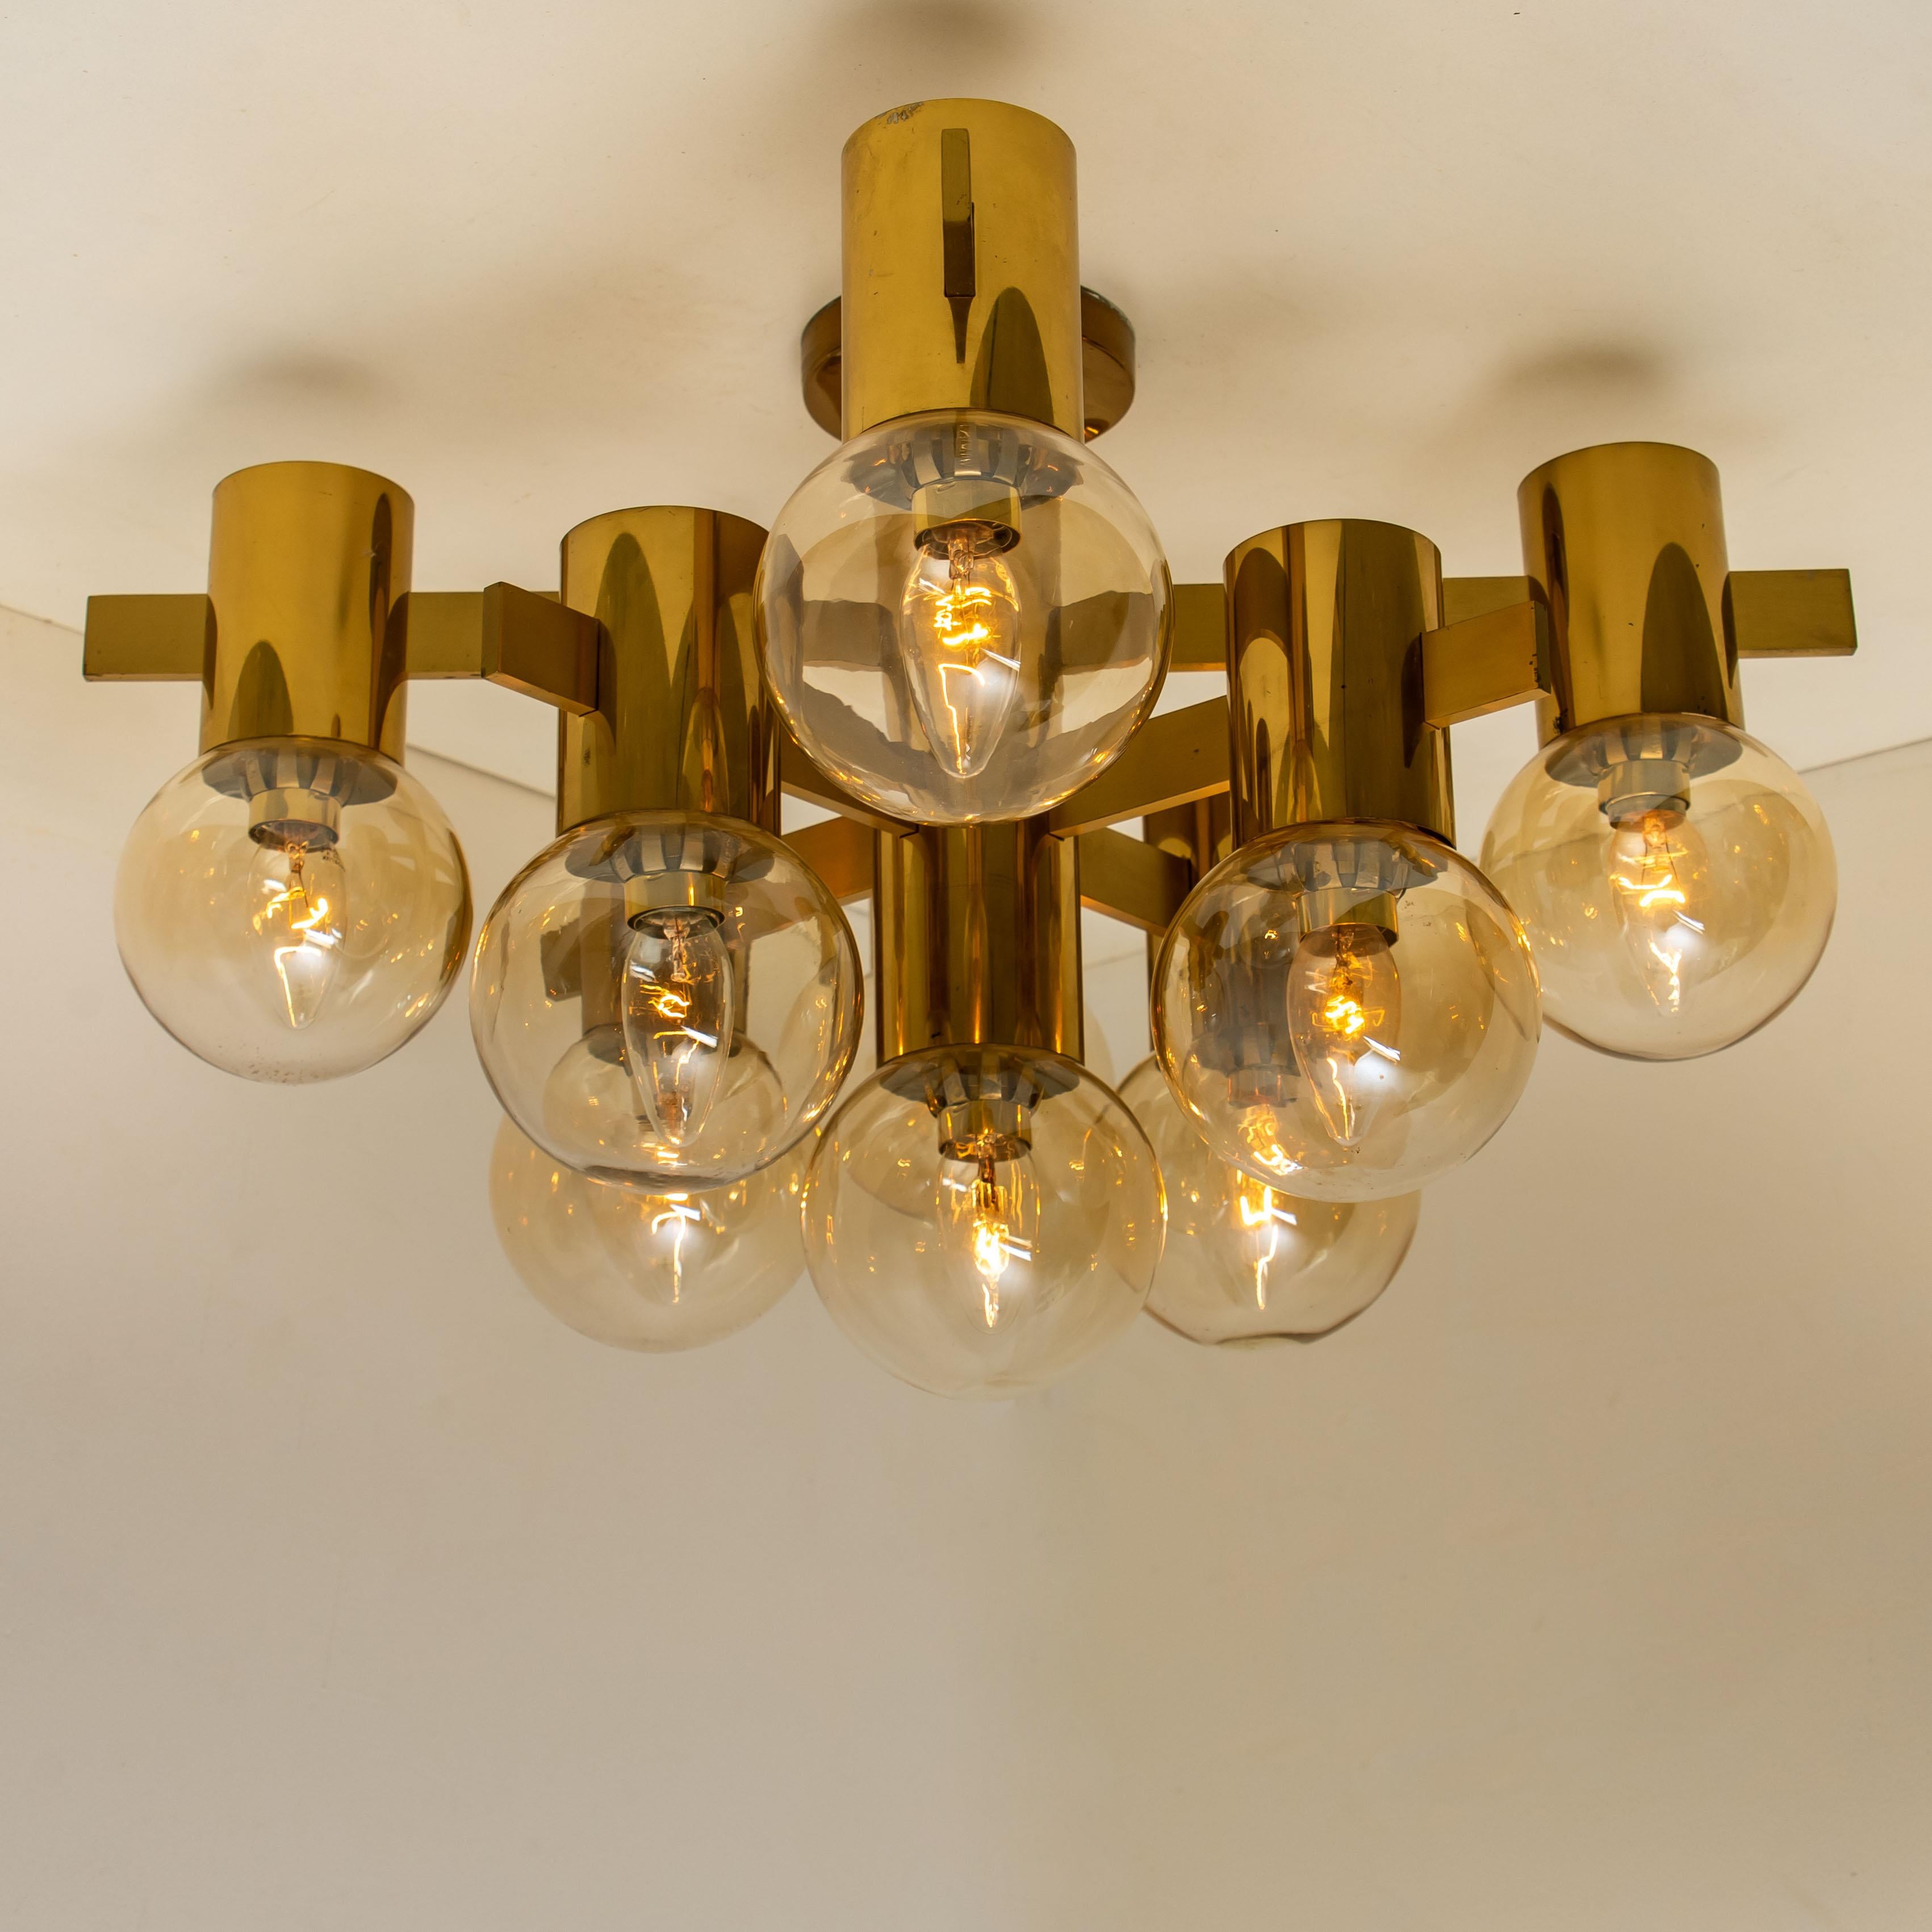 German Set of Three Brass and Glass Light Fixtures in the Style of Jakobsson, 1960s For Sale